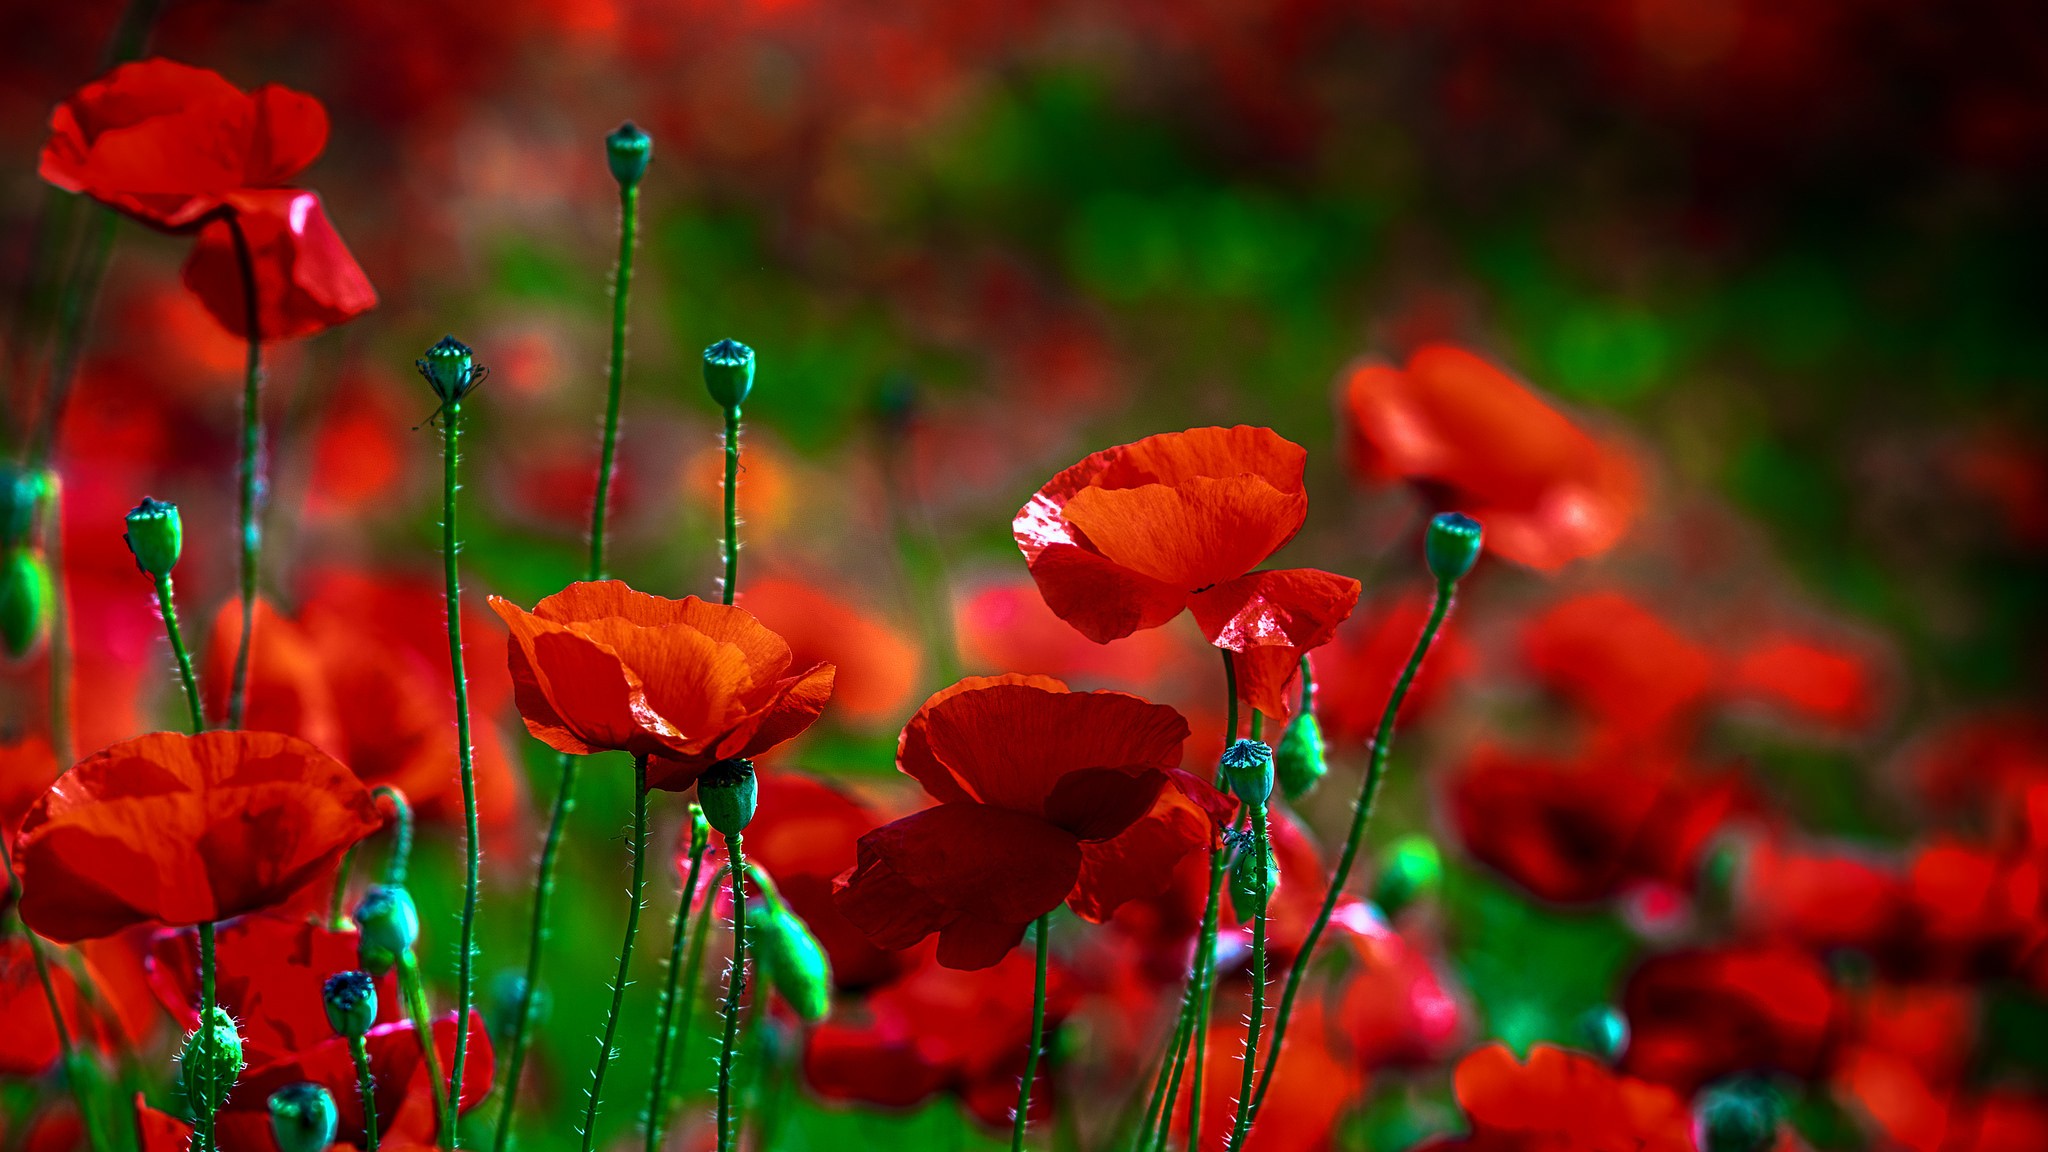 General 2048x1152 macro flowers poppies plants red flowers nature outdoors